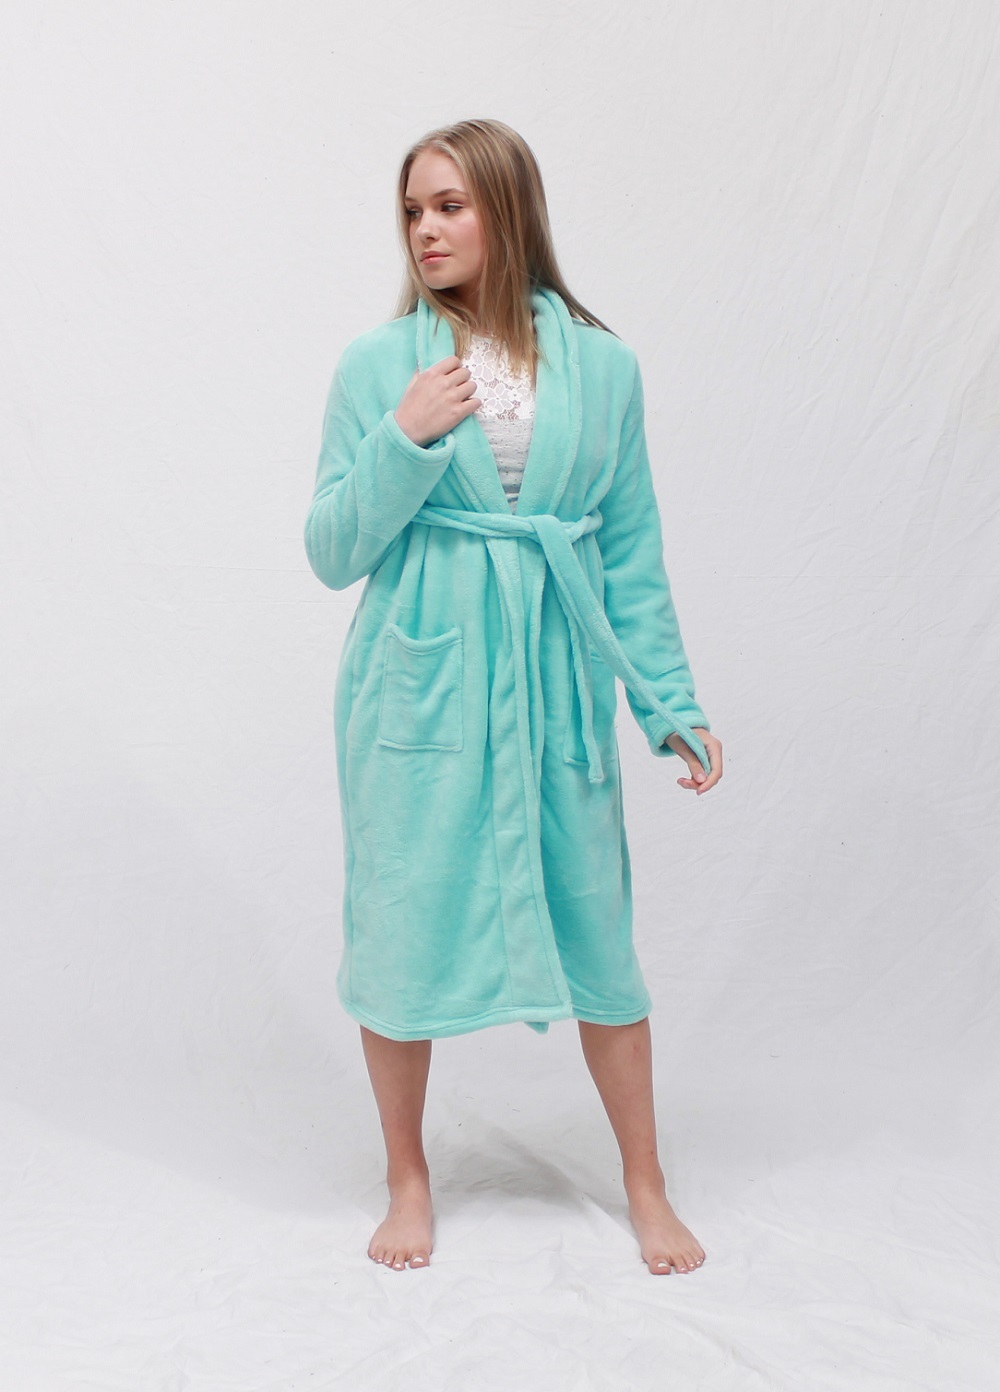 Women's Super Soft Plush Fleece Hooded Dressing Gowns, Ladies Bath Robes &  Housecoats. Buy Now For £20.00.